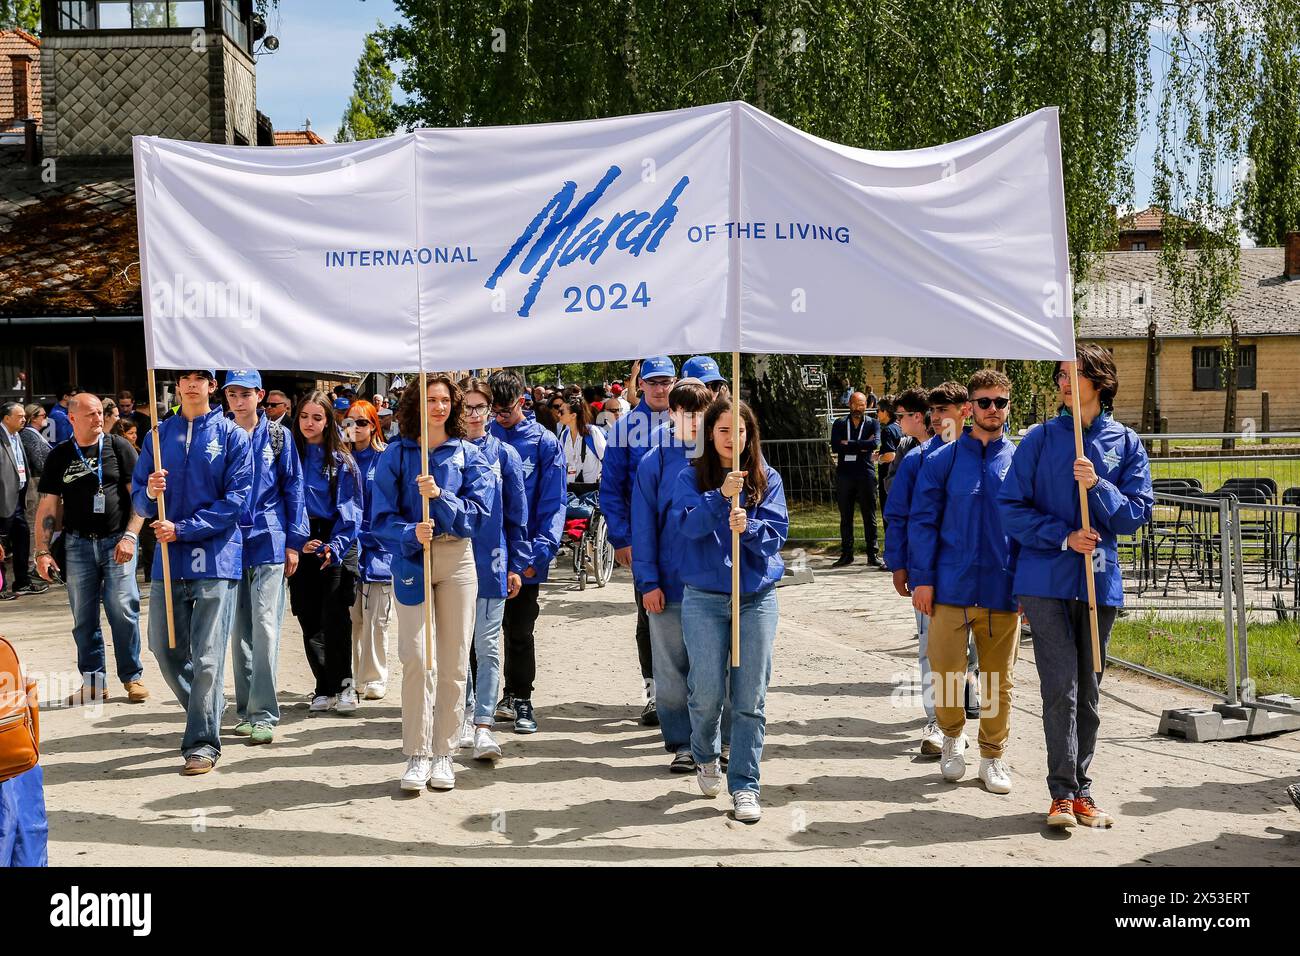 Youth leads the March of the Living 2024 at Auschwitz Camp gate 'Work Makes you Free', with 55 holocaust survivors participating. Holocaust survivors and October 7th survivors attend the March of the Living together with a delegation from, among others, the United States, Canada, Italy, United Kingdom. On Holocaust Memorial Day observed in the Jewish calendar (Yom HaShoah), thousands of participants march silently from Auschwitz to Birkenau. The march has an educational and remembrance purpose. This year's March was highly politicized due to the Israeli war in Occupied Palestine. (Photo by Dom Stock Photo